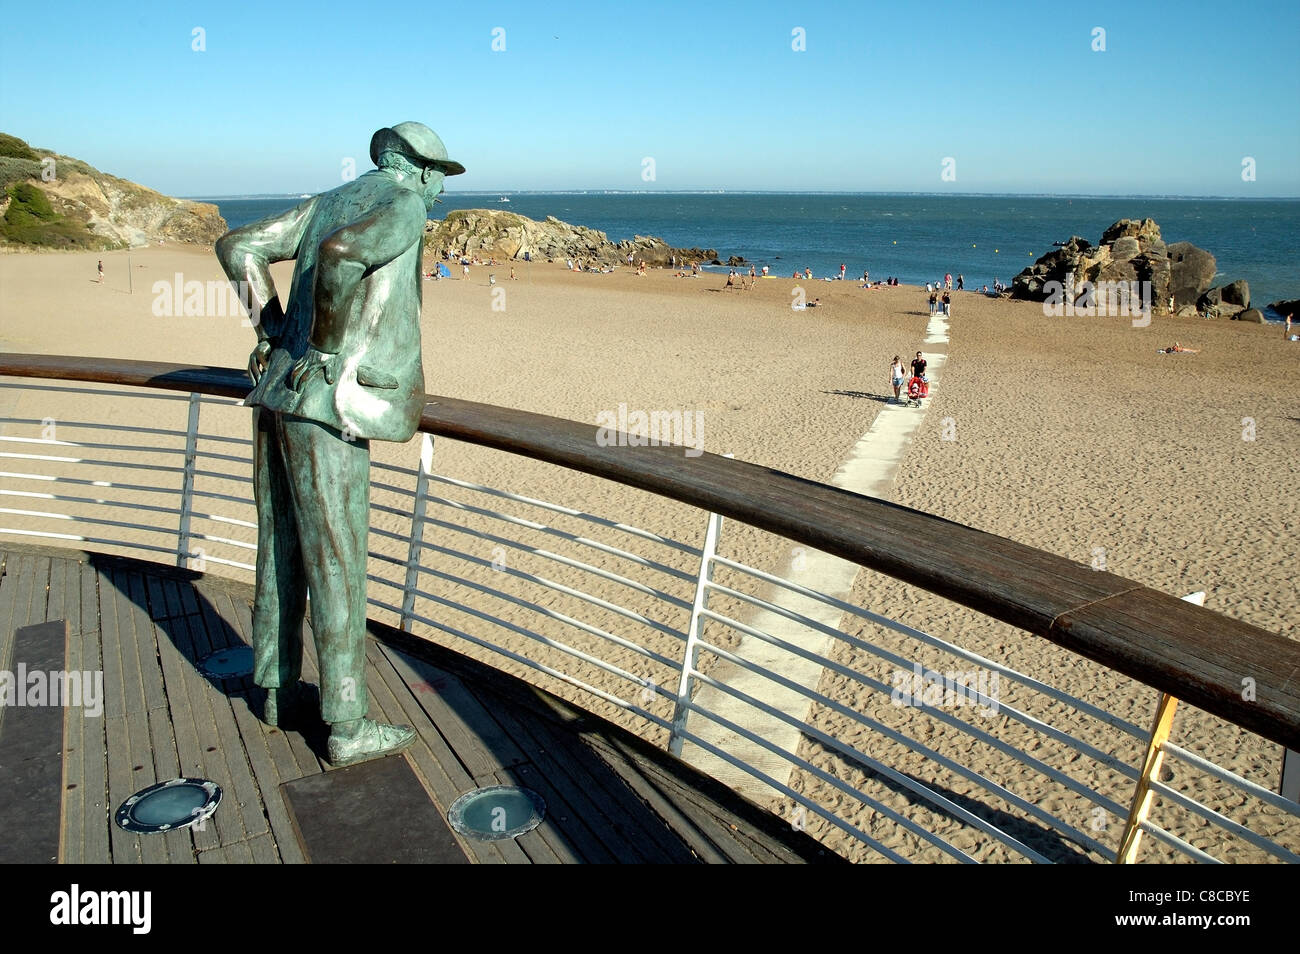 Jacques Tati statue looks out over the beach at Saint-Marc-Sur-Mer, Brittany, France Stock Photo